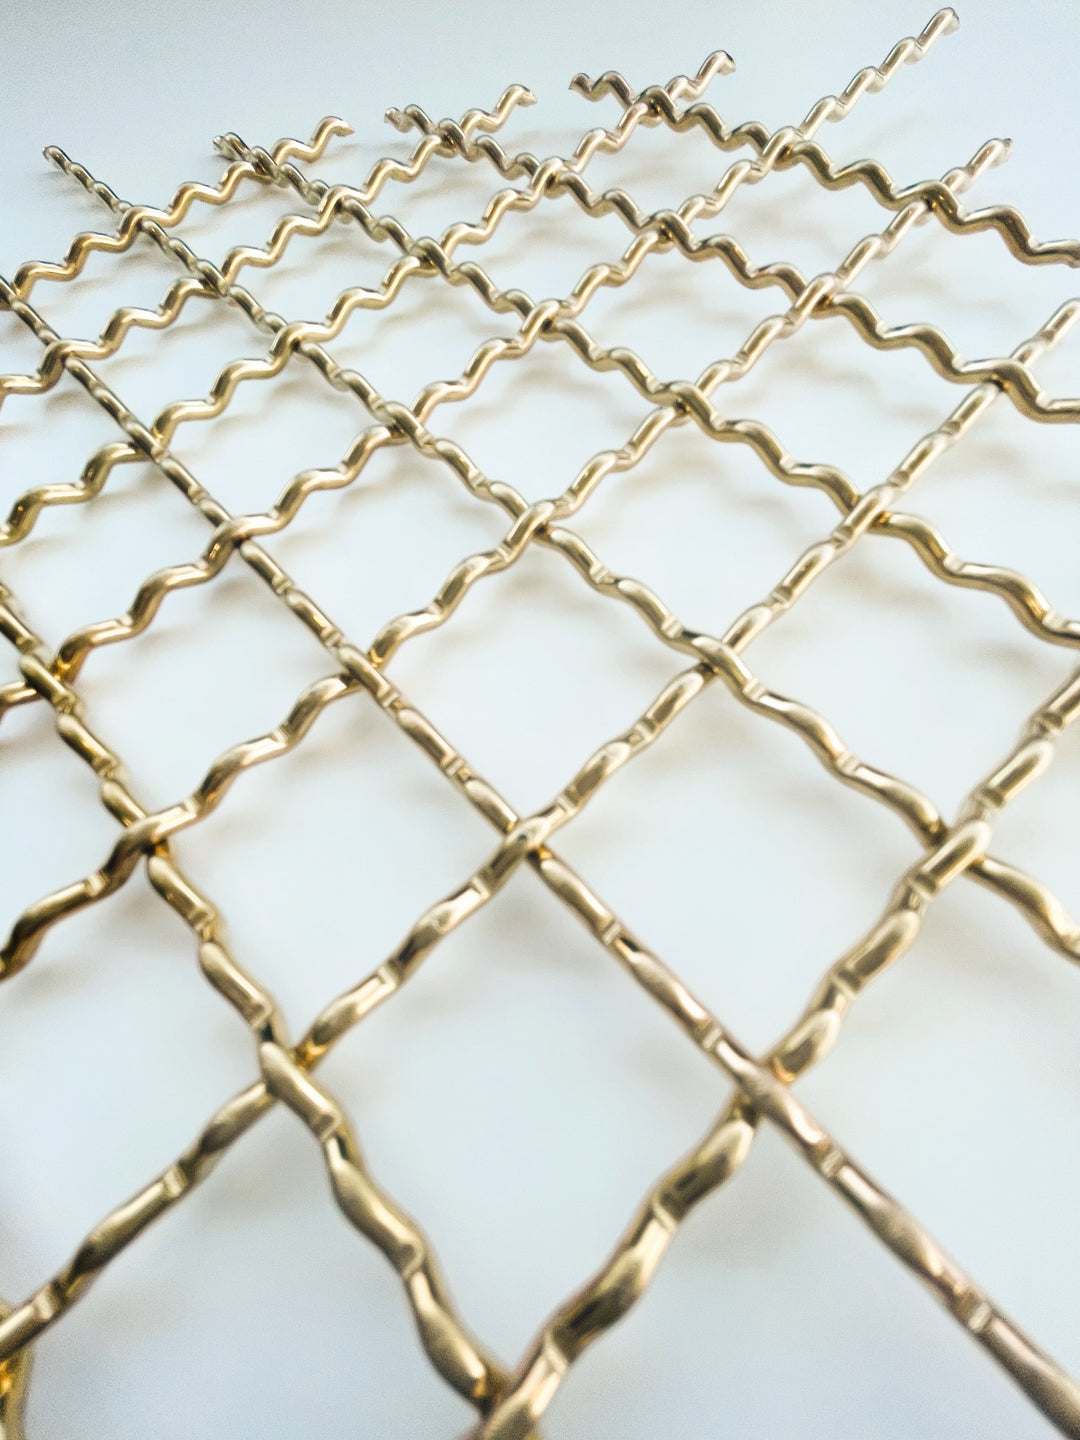 Wire Mesh Brass Architectural Woven Furniture and Creative Grille Mesh - Purdy Hardware - Wire Mesh